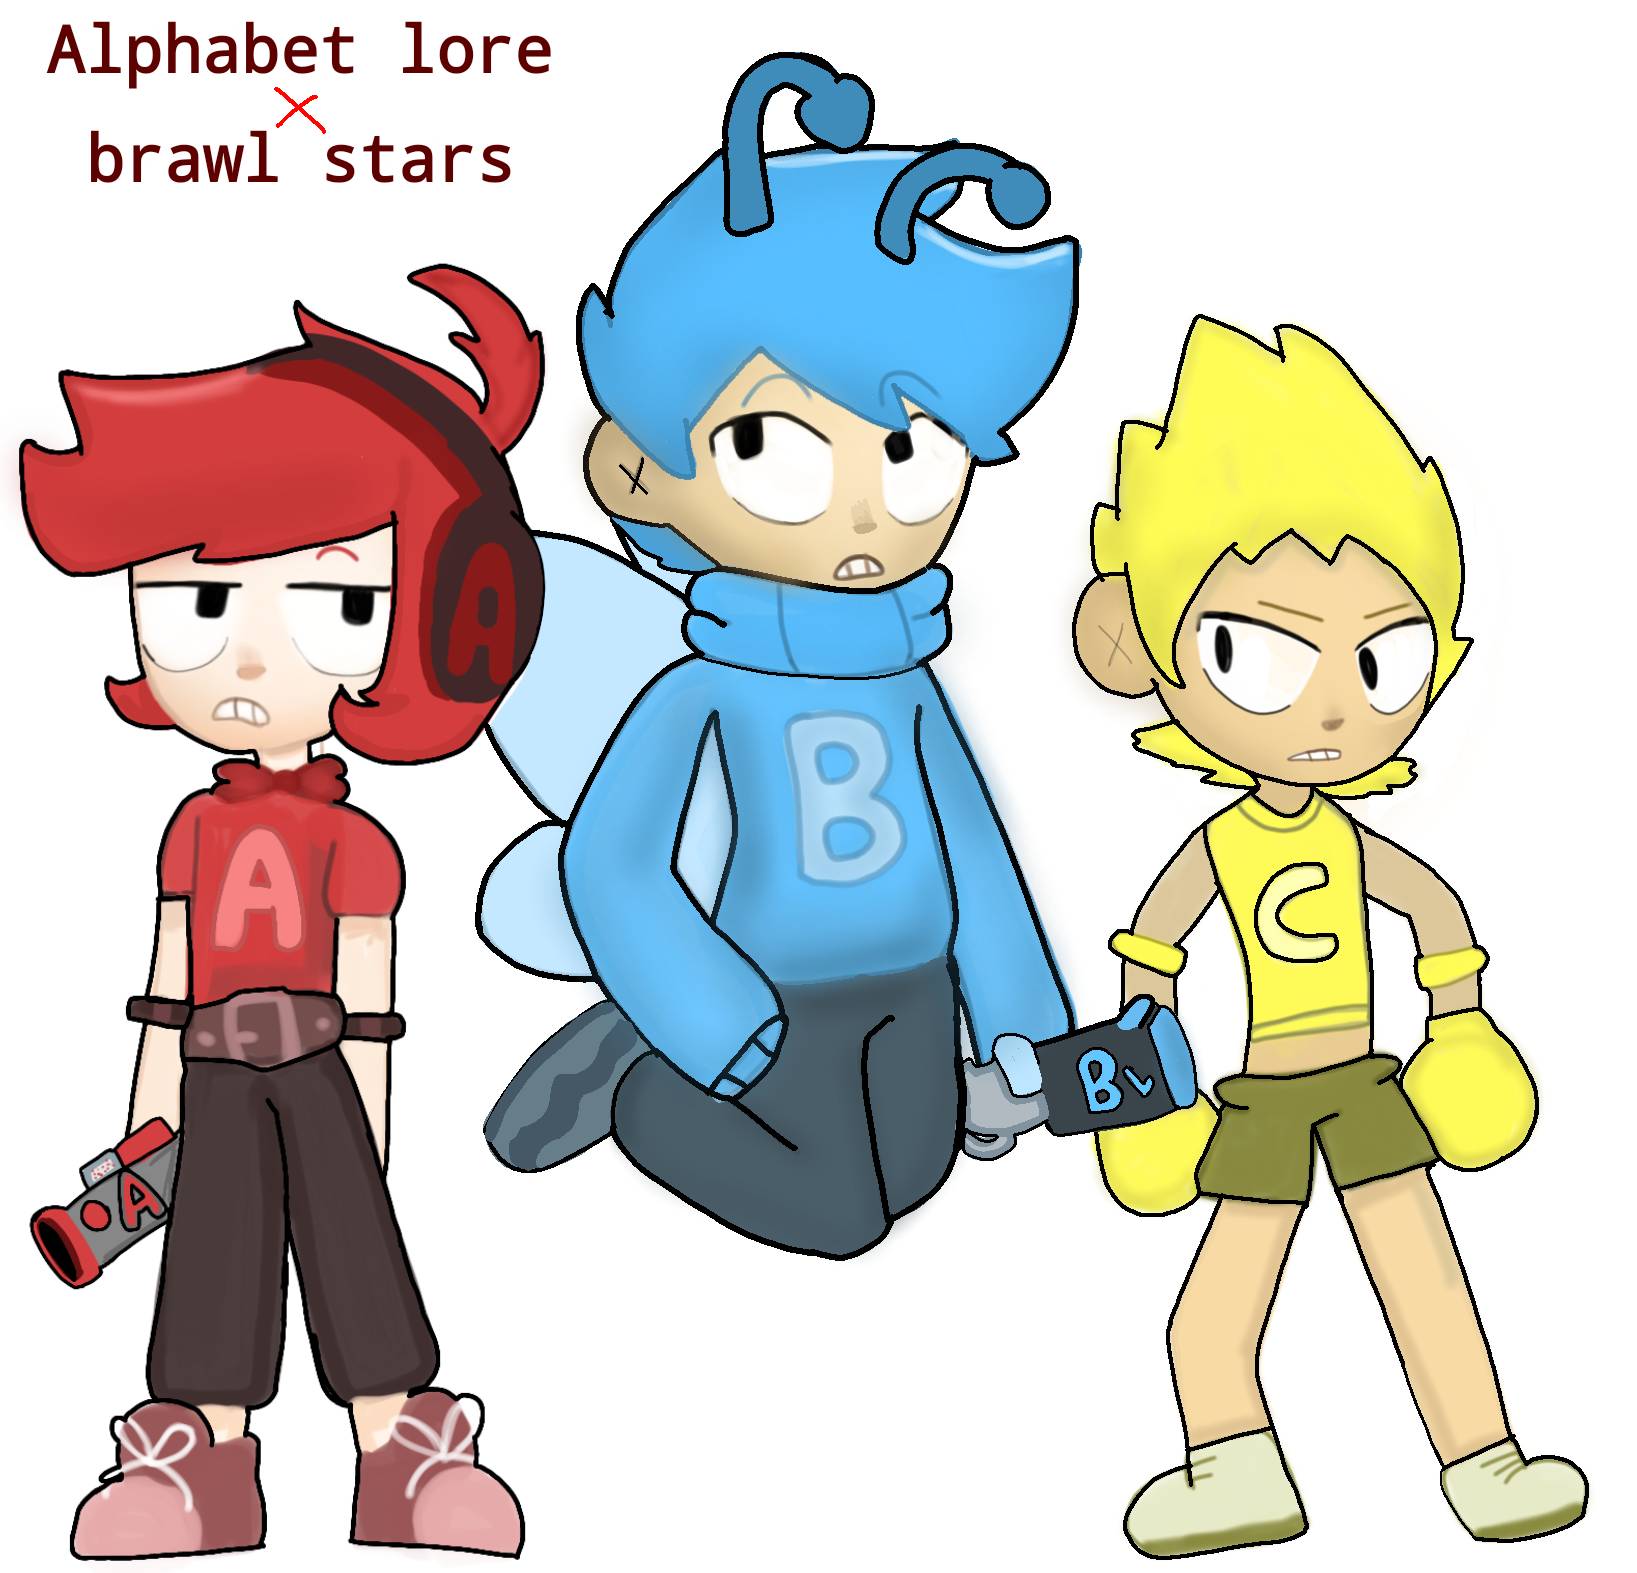 X, Y, and 1 from number/Alphabet lore by Samoanqueenbrilol on DeviantArt